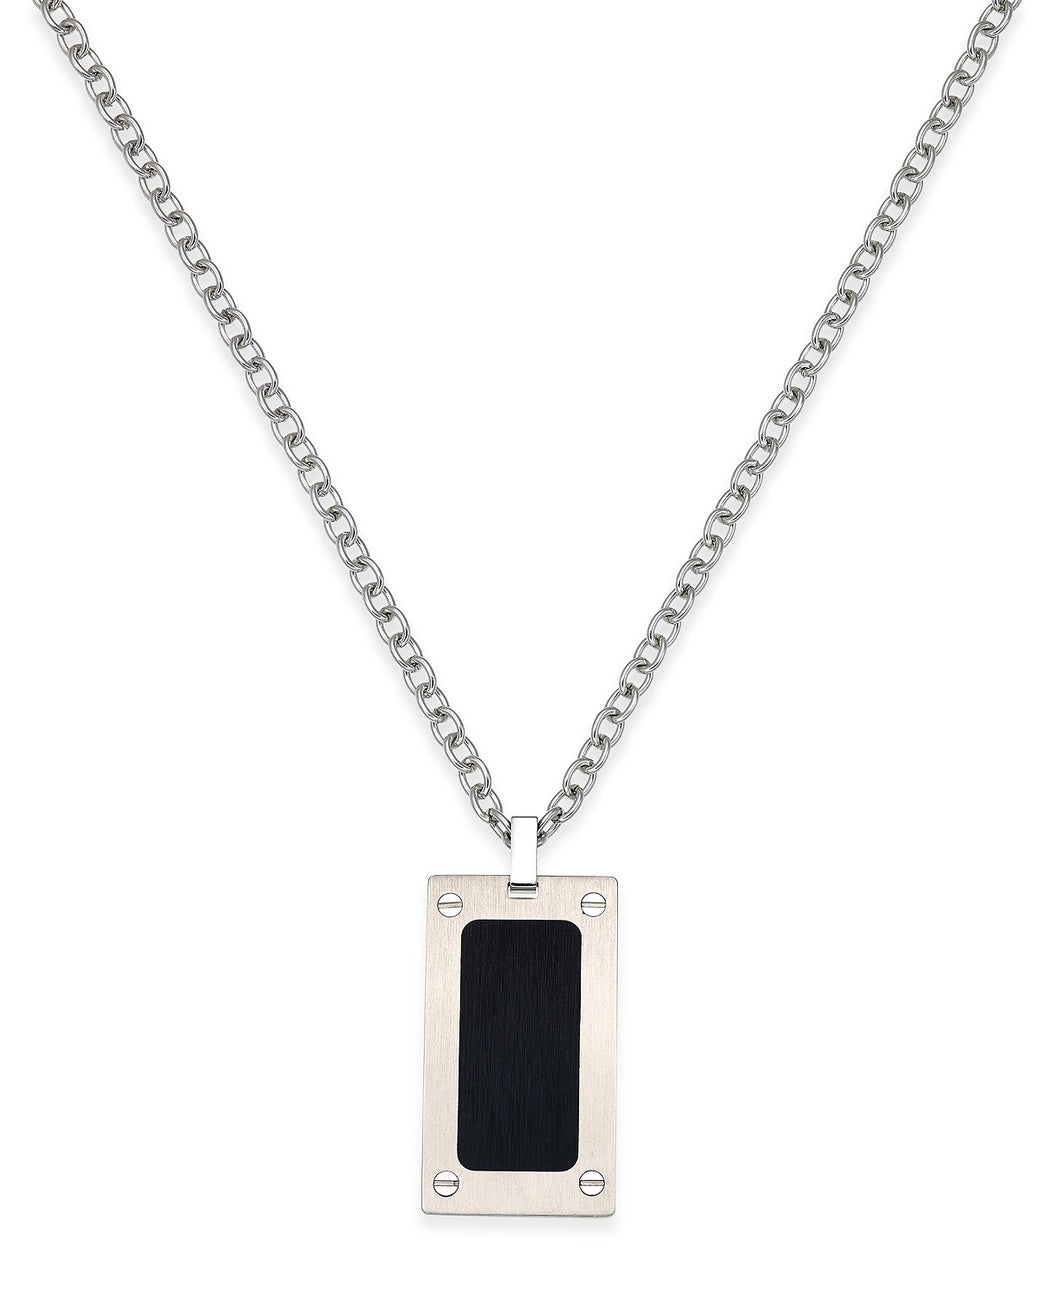 Men's Two-Tone Stainless Steel Dog Tag Pendant Necklace